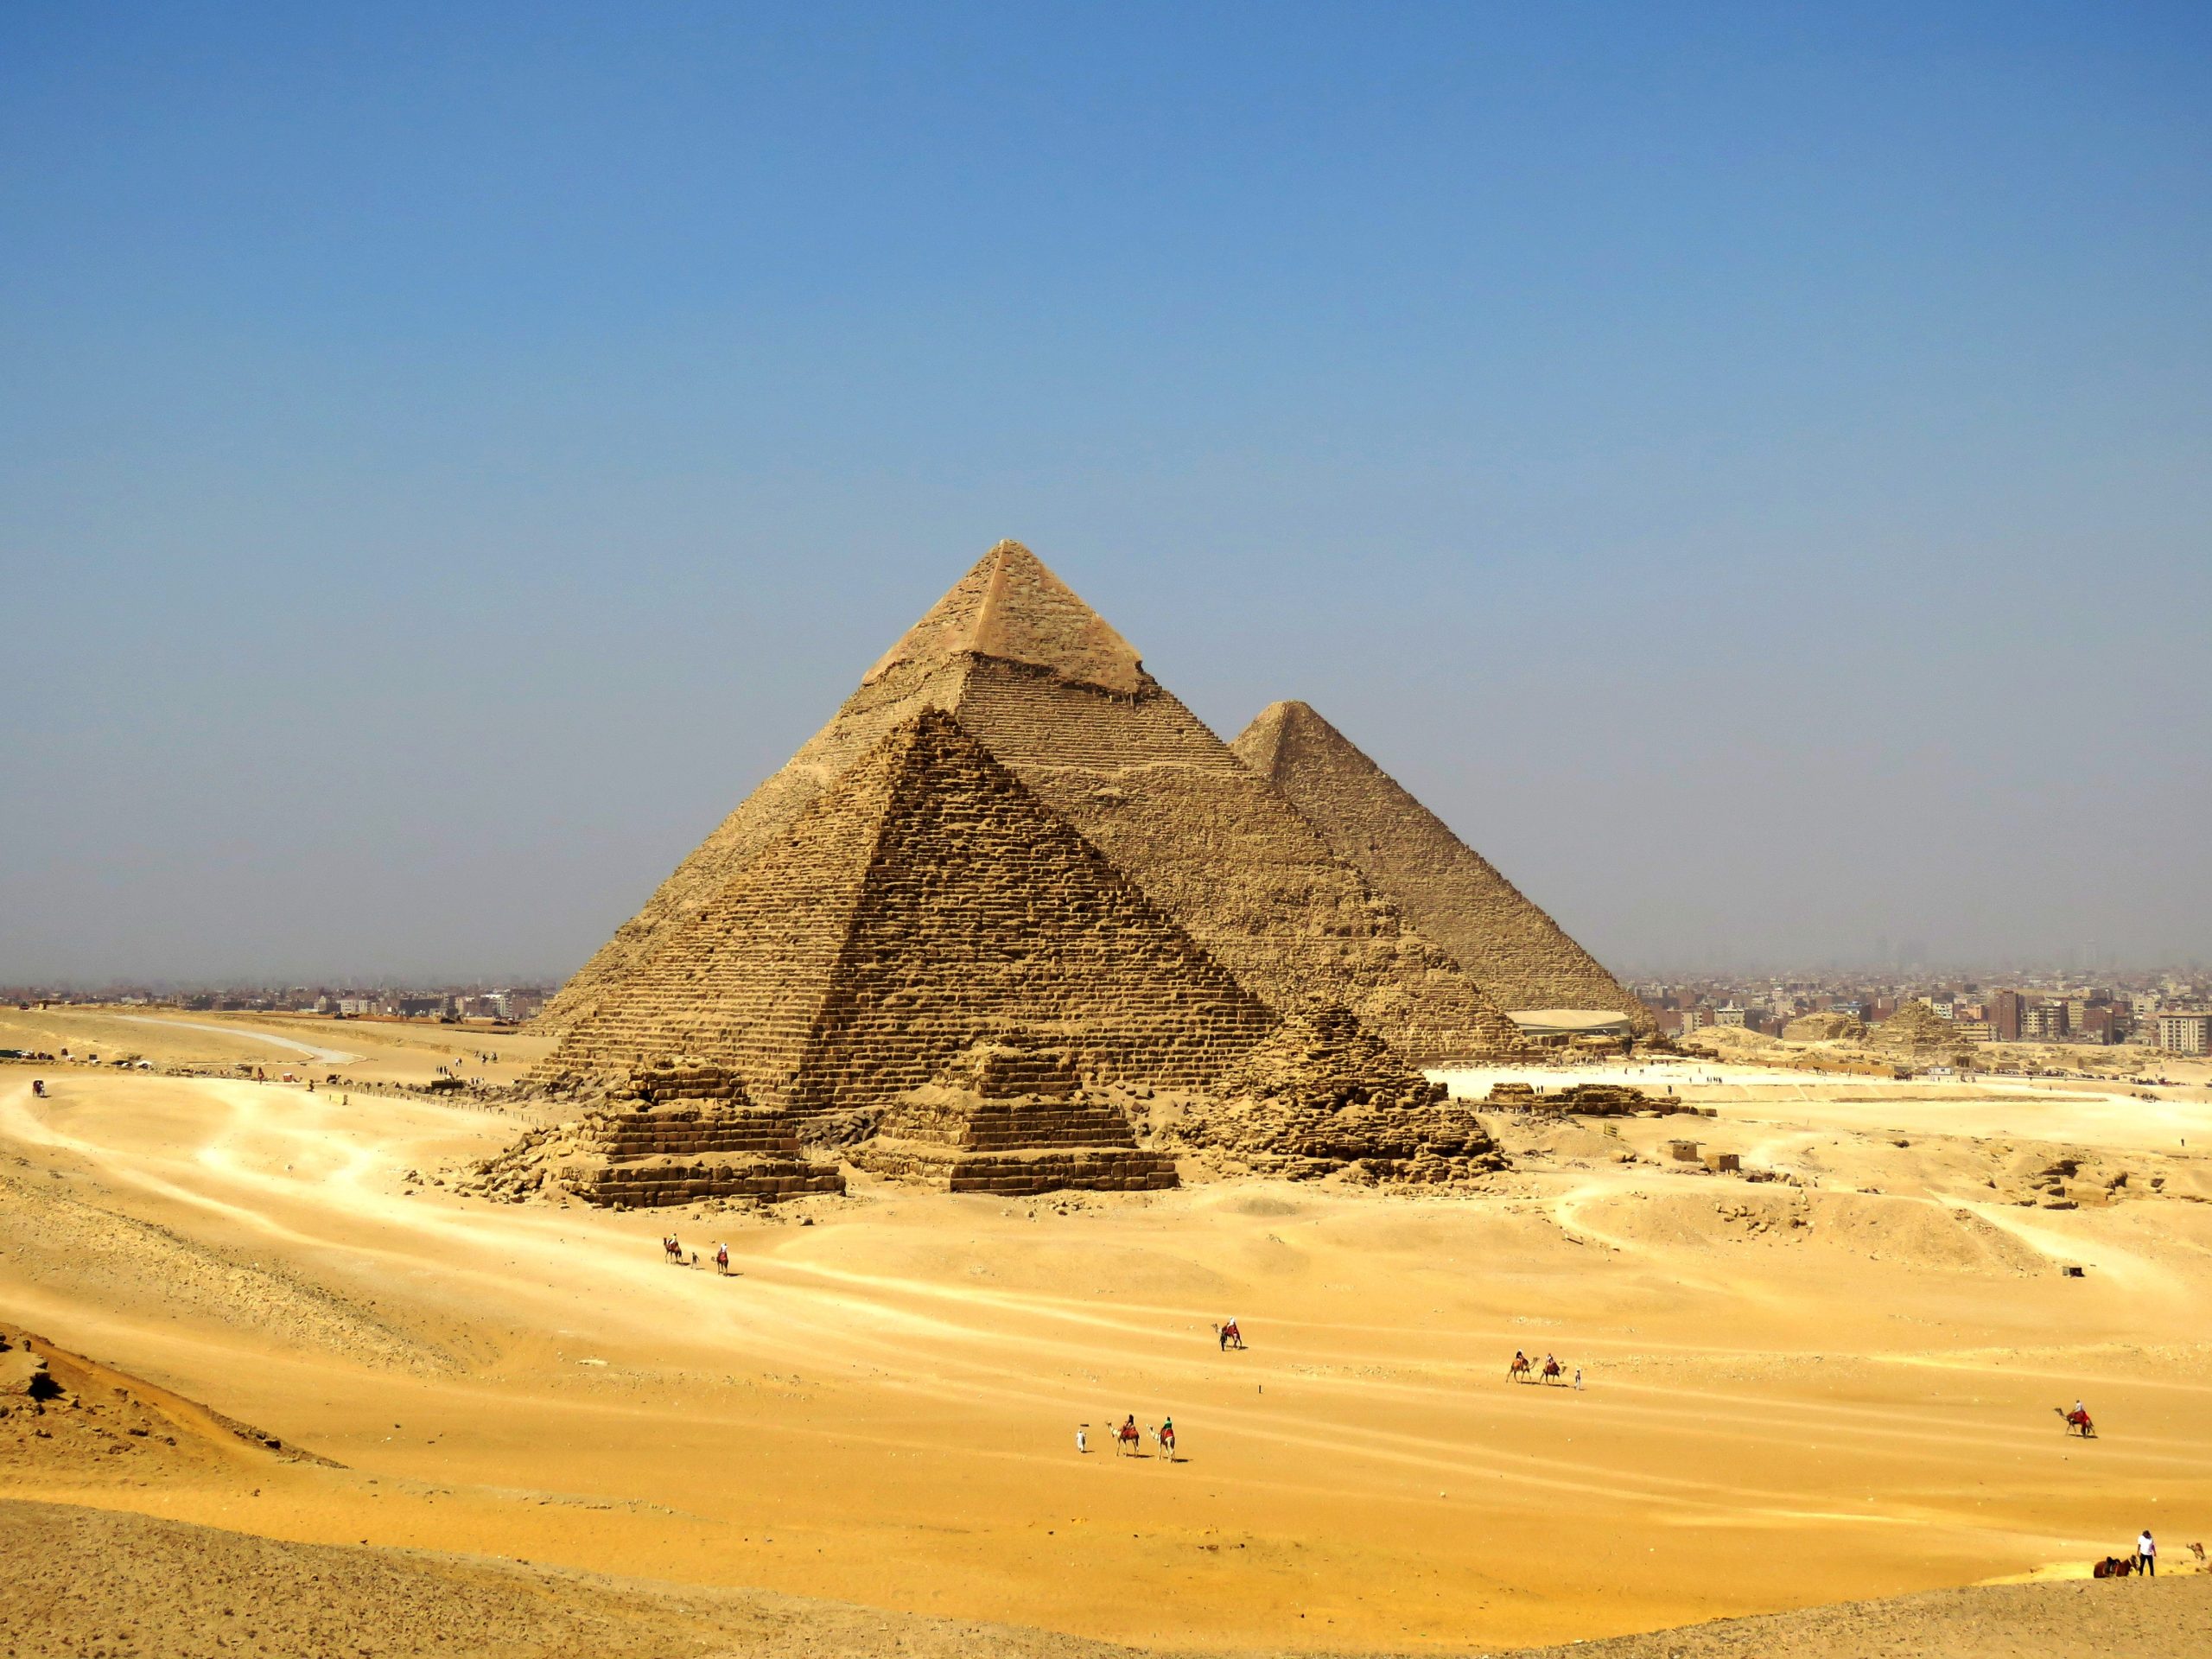 Enjoy the Sites of the Pyramids of Giza as you experience a Small Group Luxury Tour with Ancient Navigator.